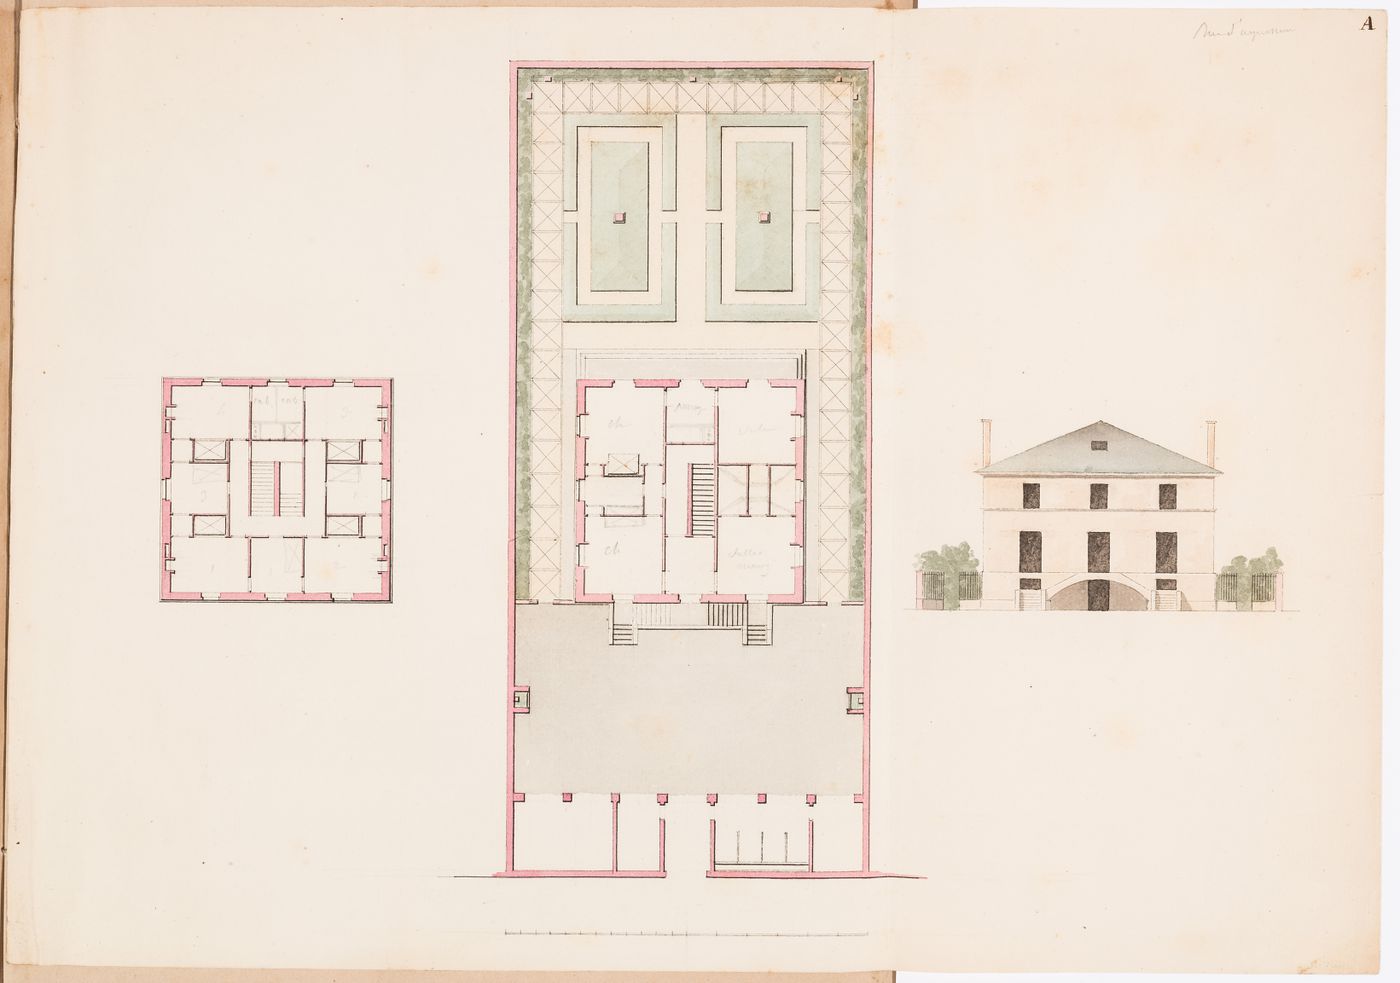 Front elevation, site plan, and plan for the first floor for a house and garden on rue d'Aguesseau, Paris